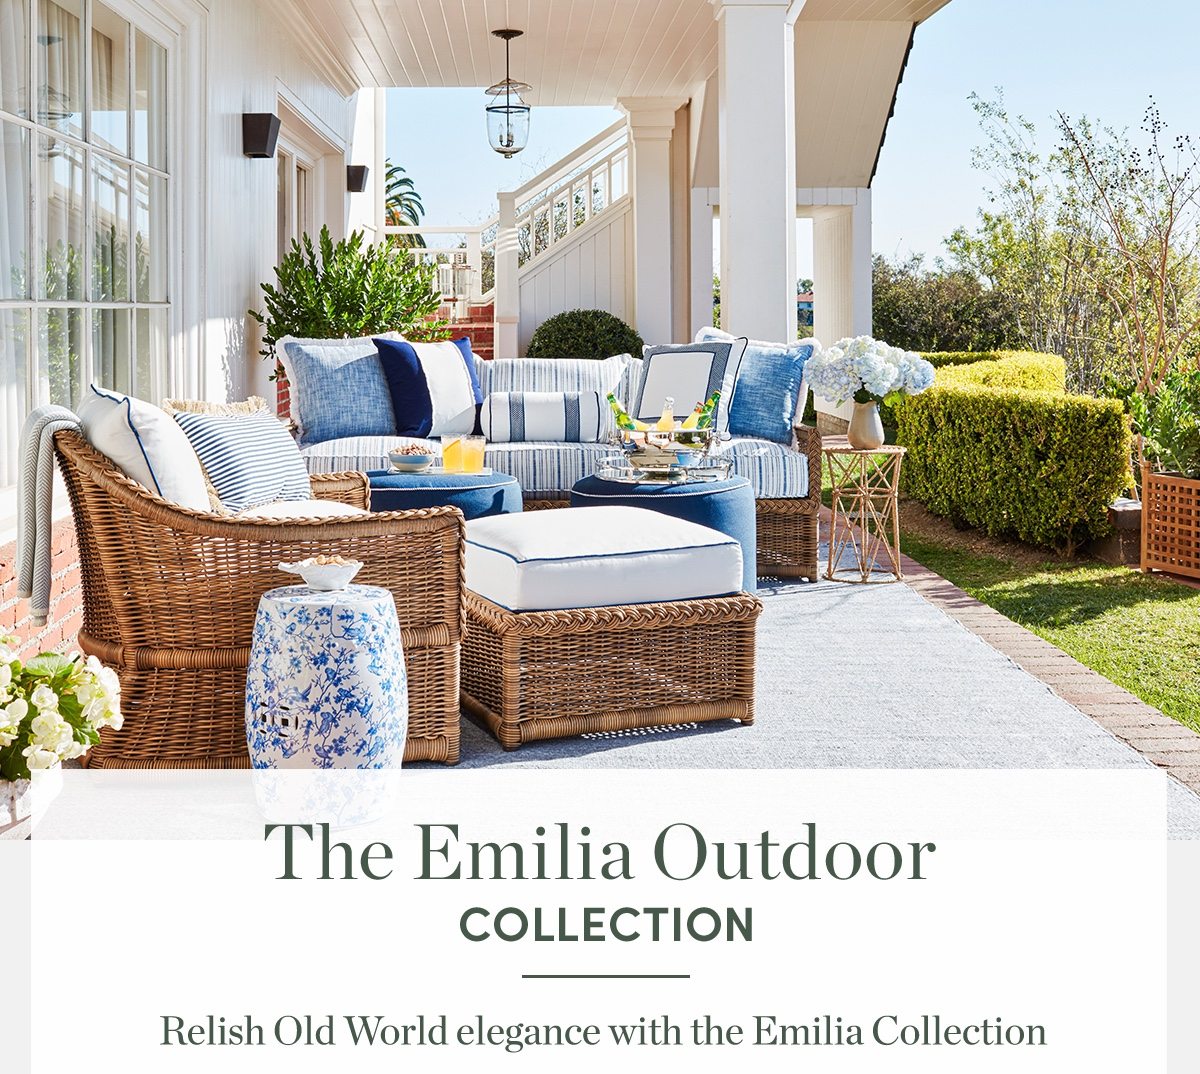 The Emilia Outdoor Collection